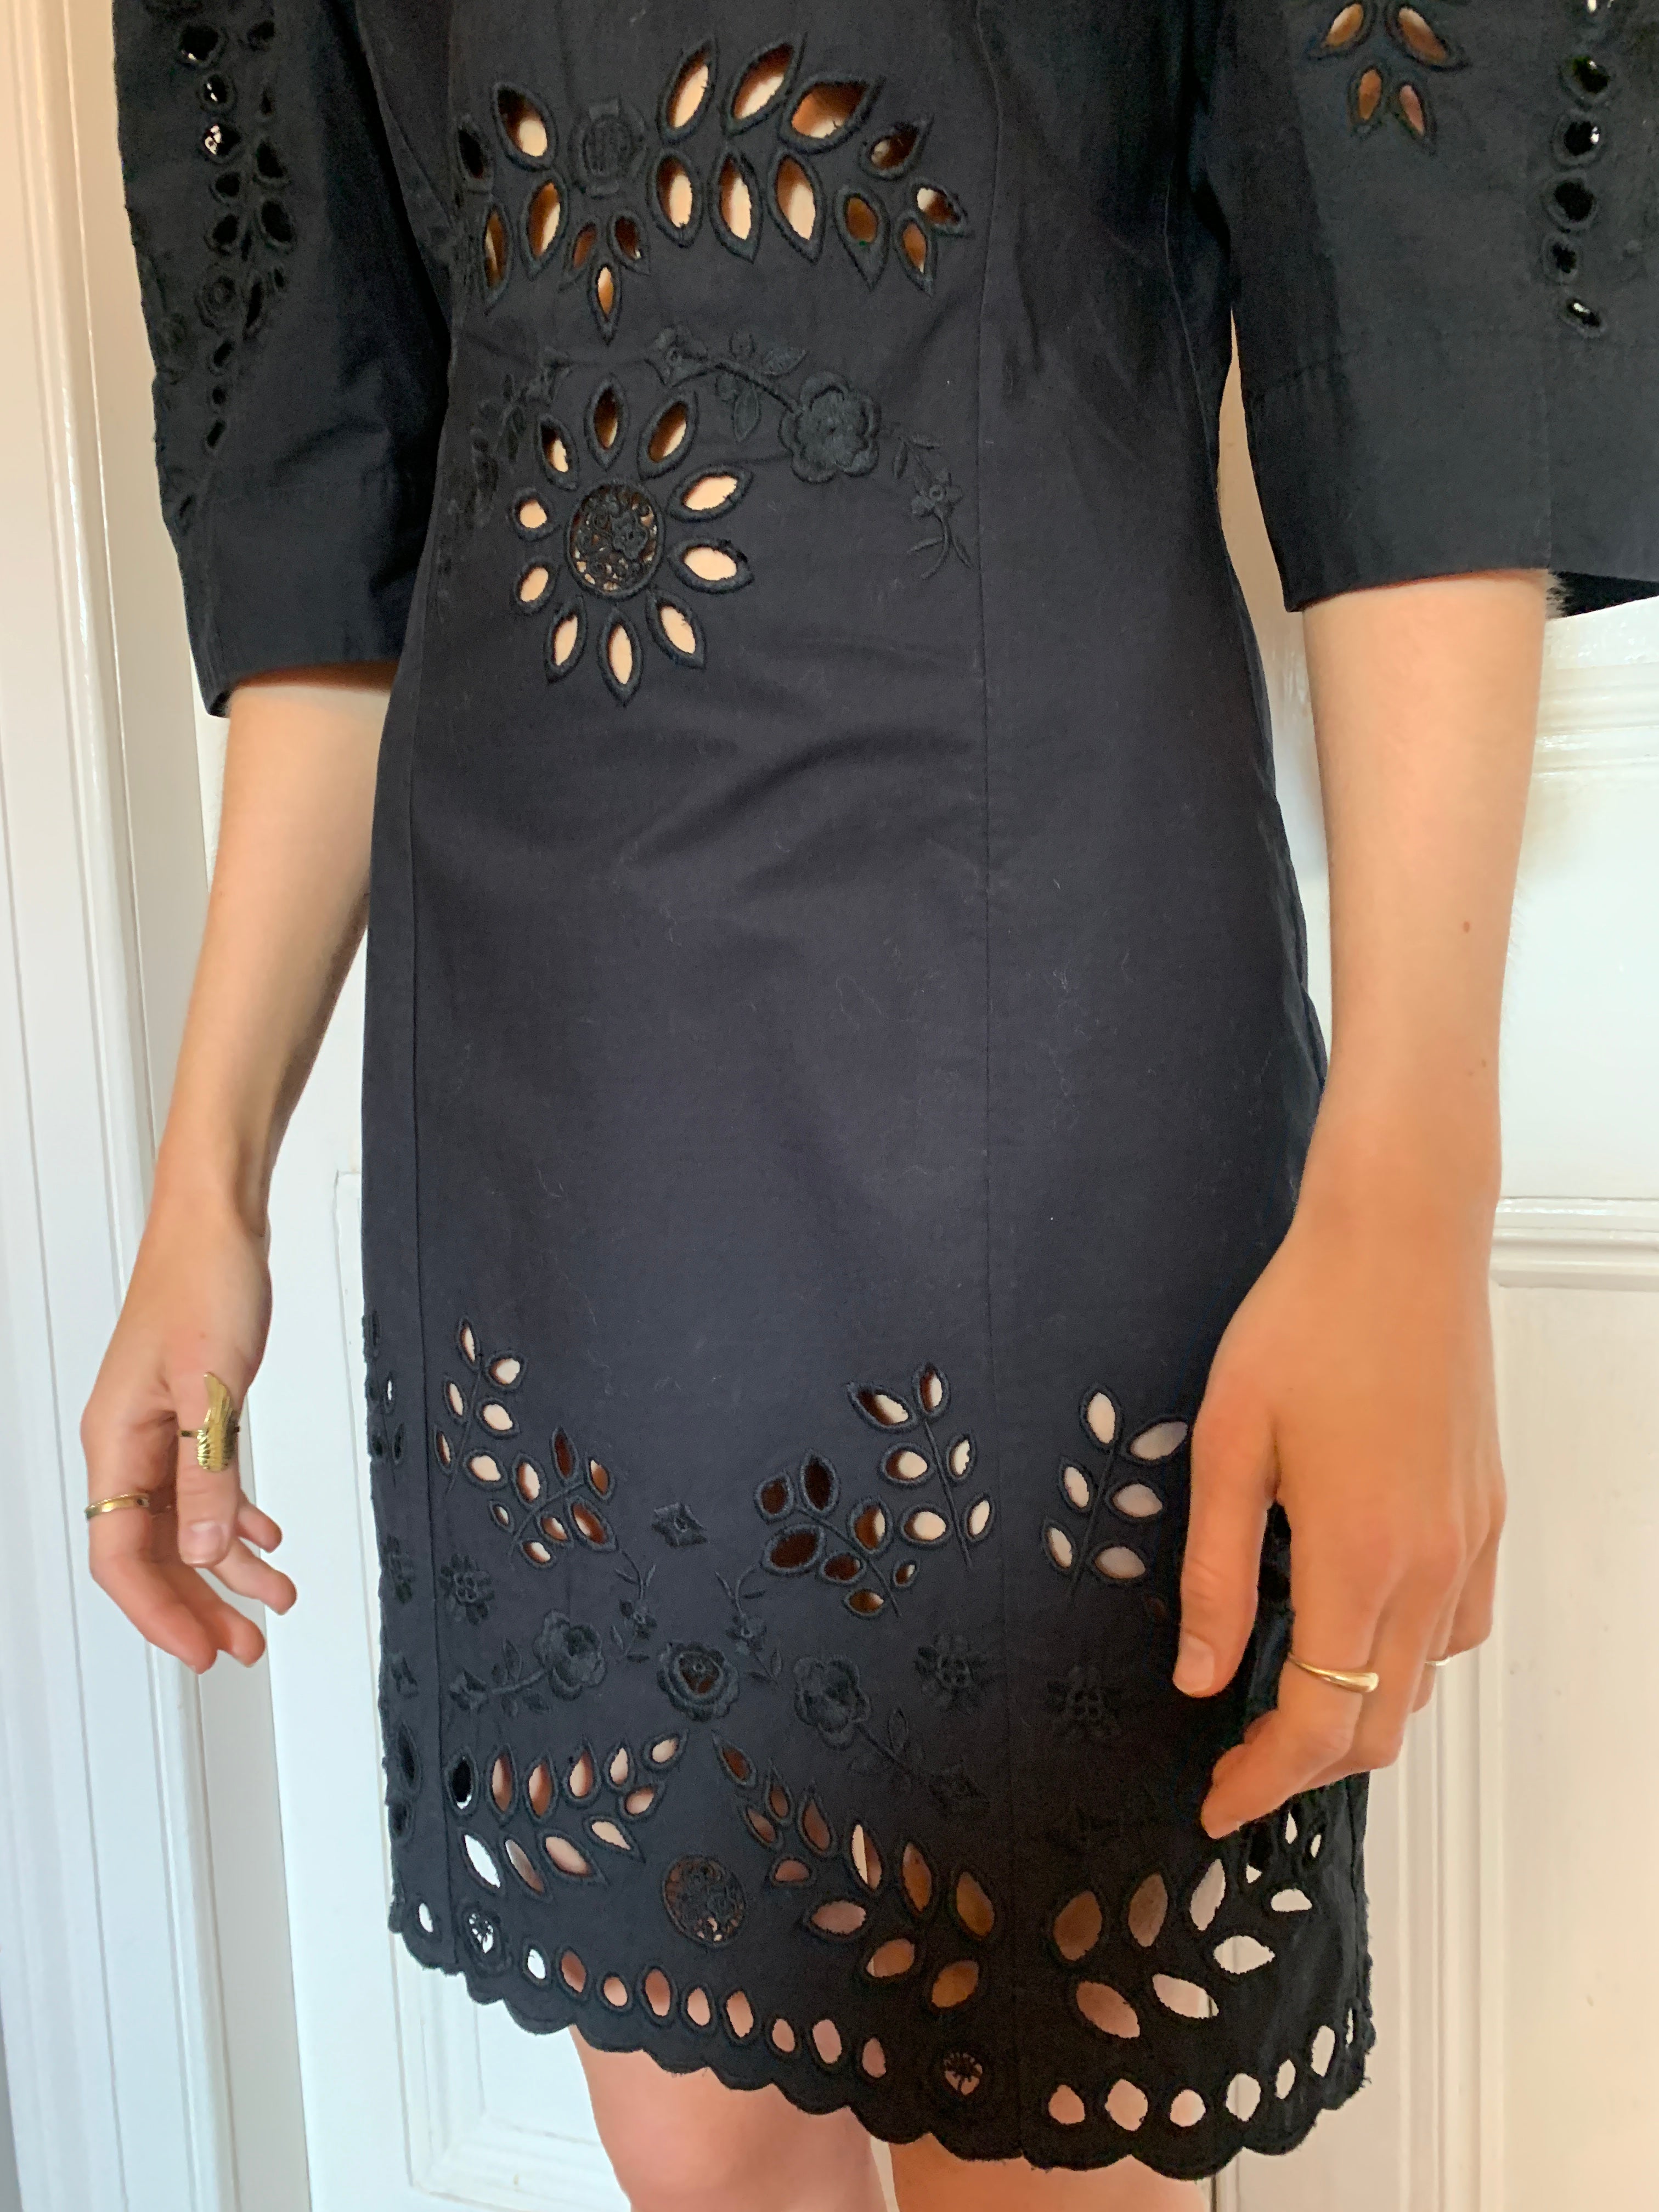 Pre-loved Isabel Marant hand embroidered dress